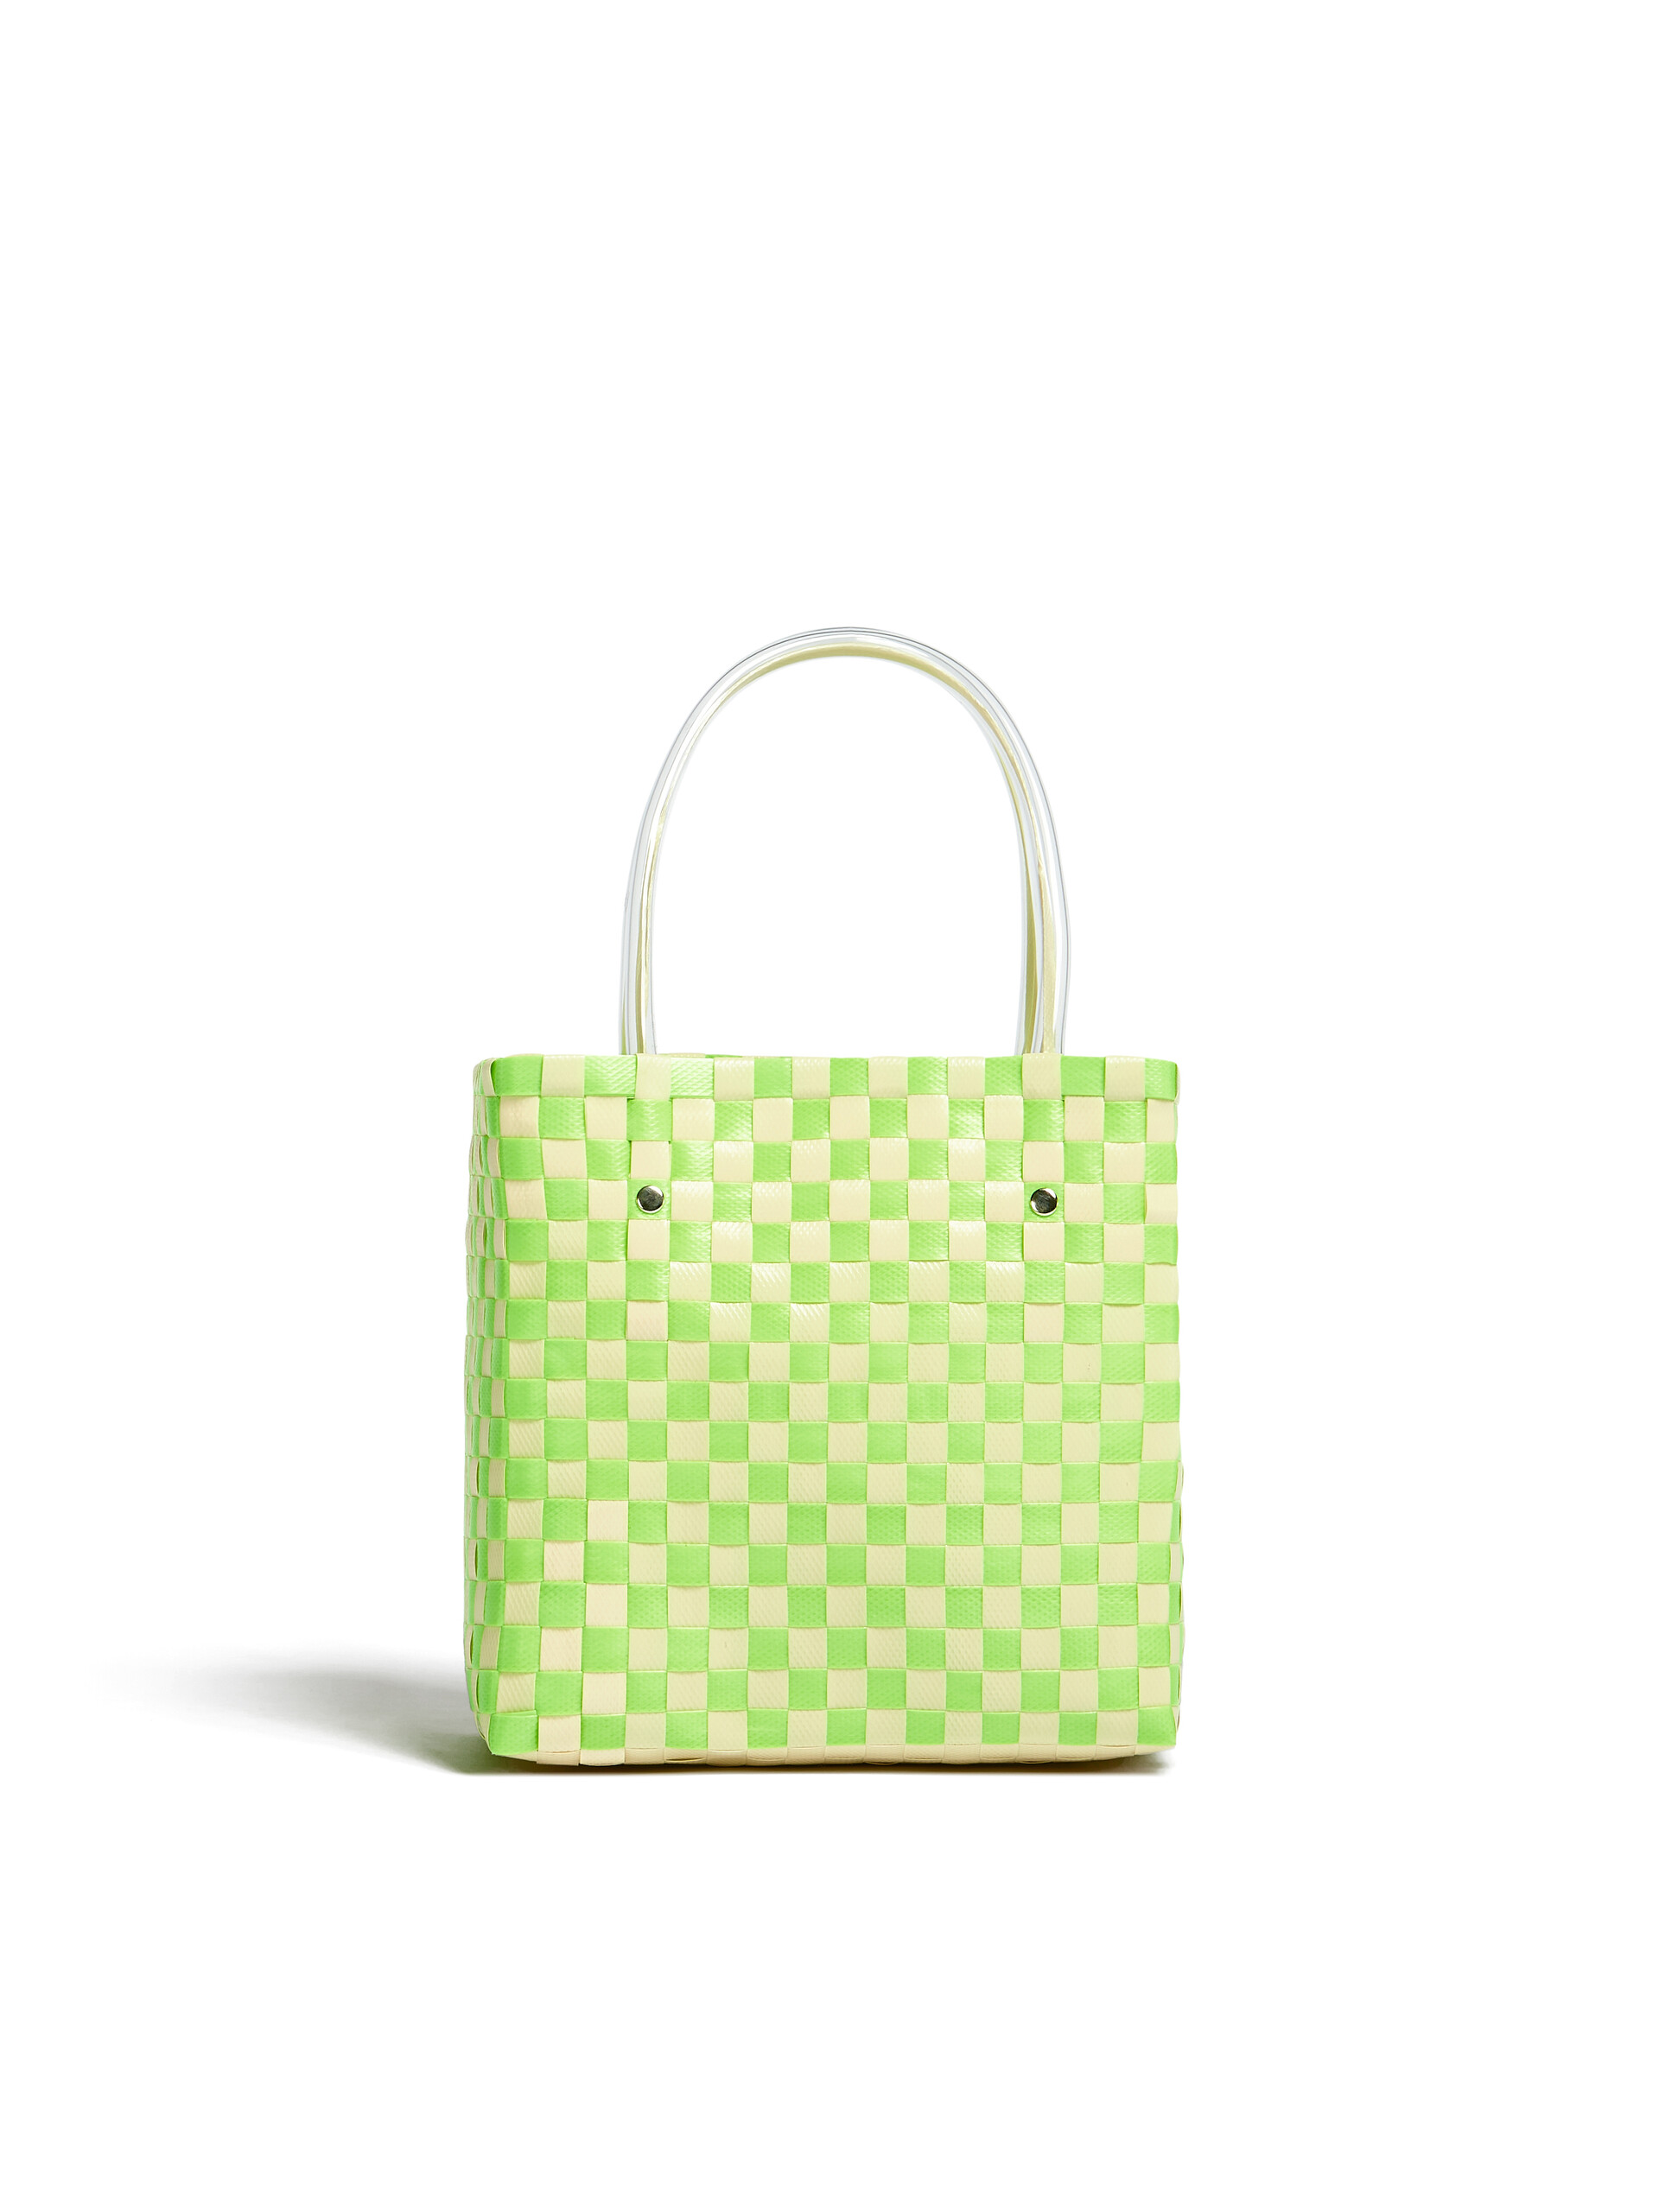 MARNI MARKET shopping bag in green woven material with M logo - Bags - Image 3